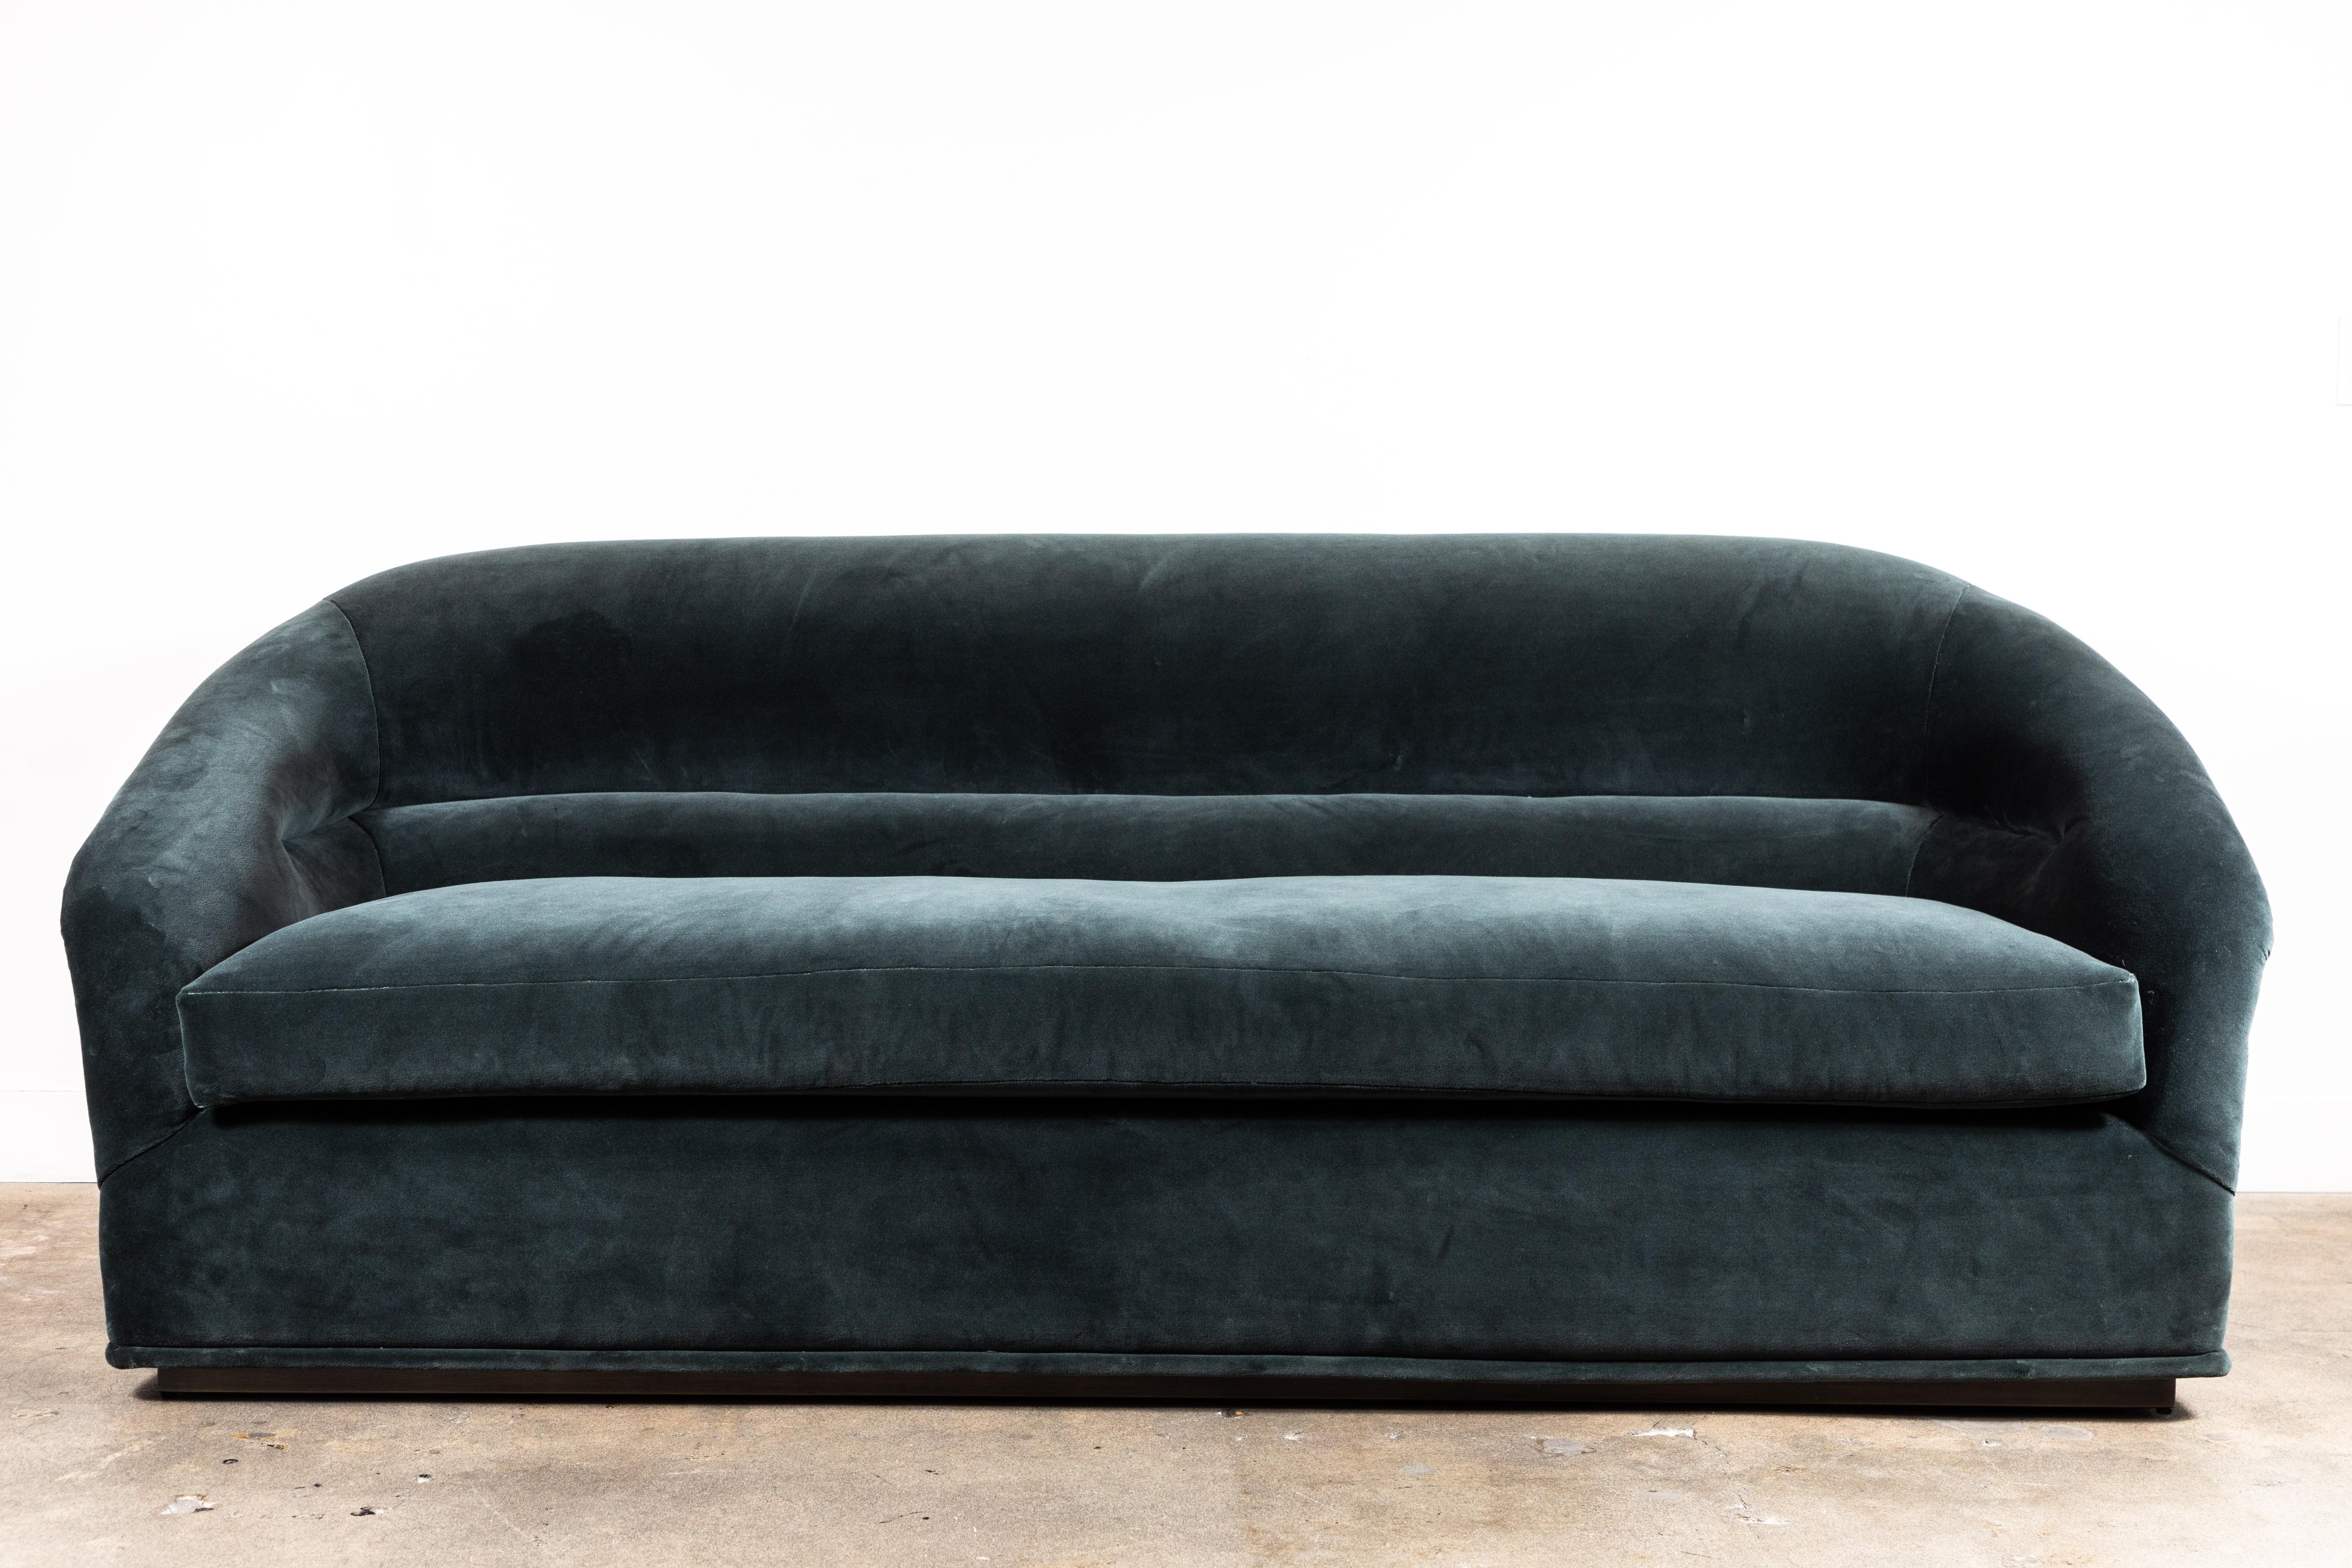 Velvet Huxley Sofa by Lawson-Fenning. The Huxley sofa is inspired by 1970s lounge furniture. A curvaceous form with a single line tuft and long seat cushion rest atop a polished brass base. 

The Lawson-Fenning Collection is designed and handmade in